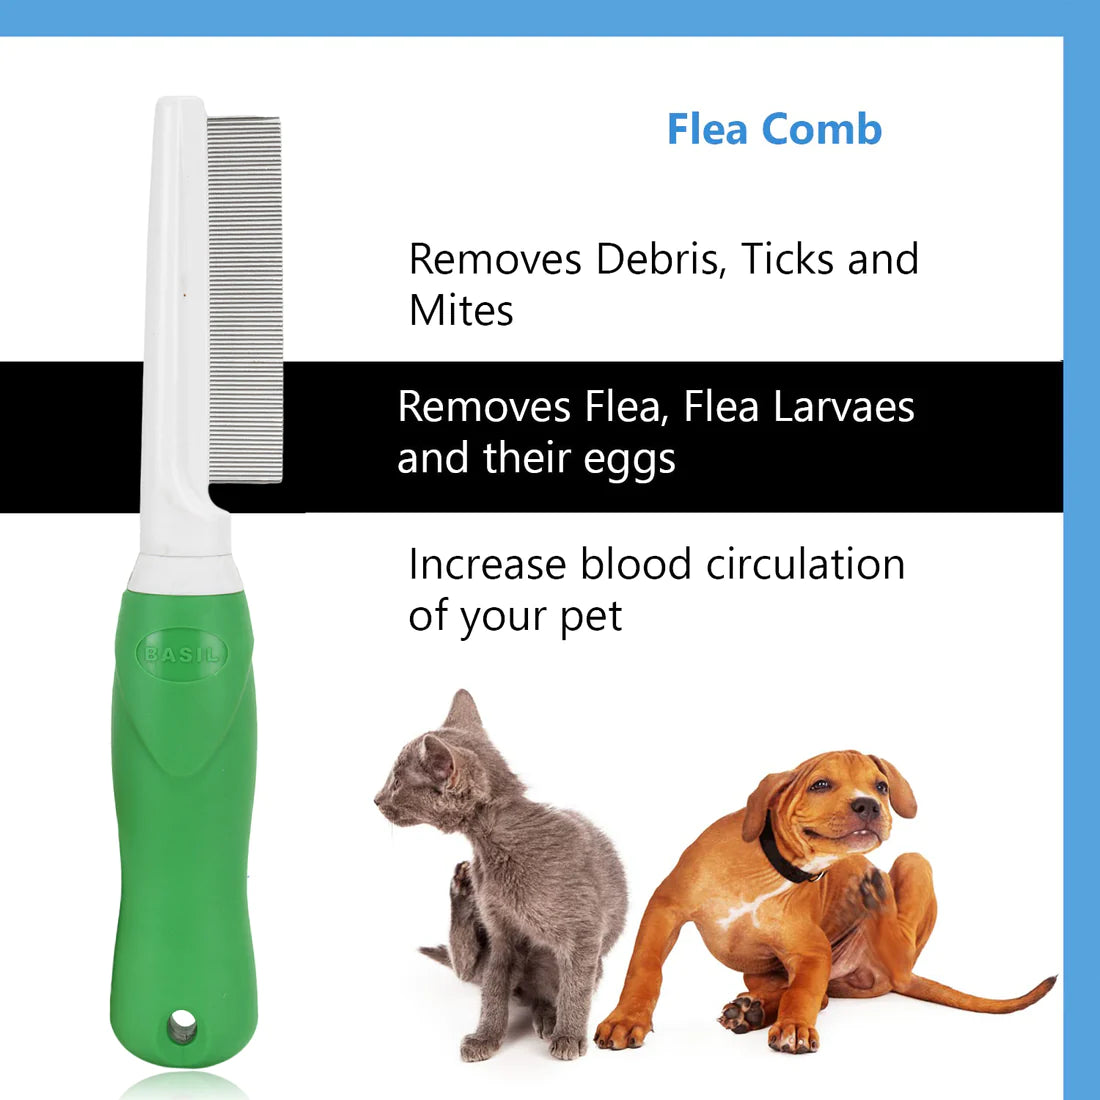 Basil Flee Comb For Dogs & Cats